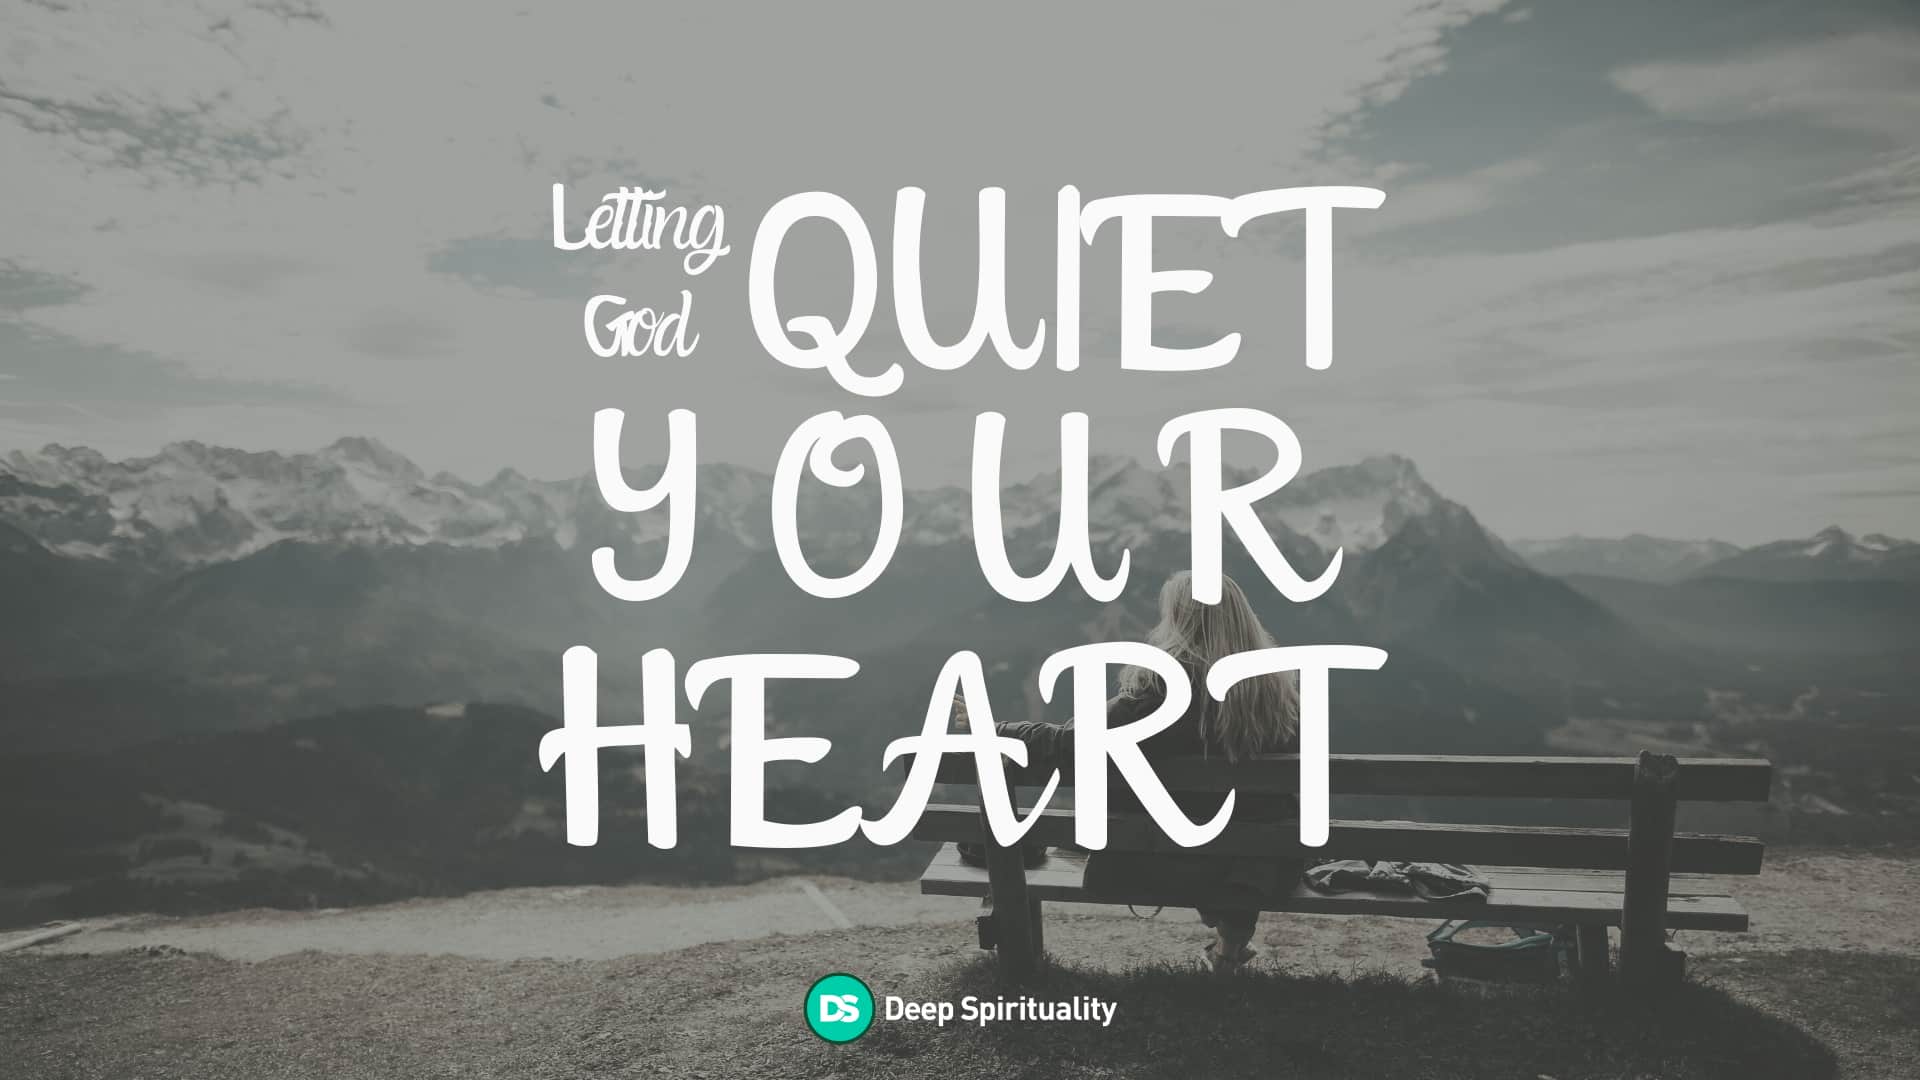 The Ultimate Guide to Letting God Quiet Your Heart 3